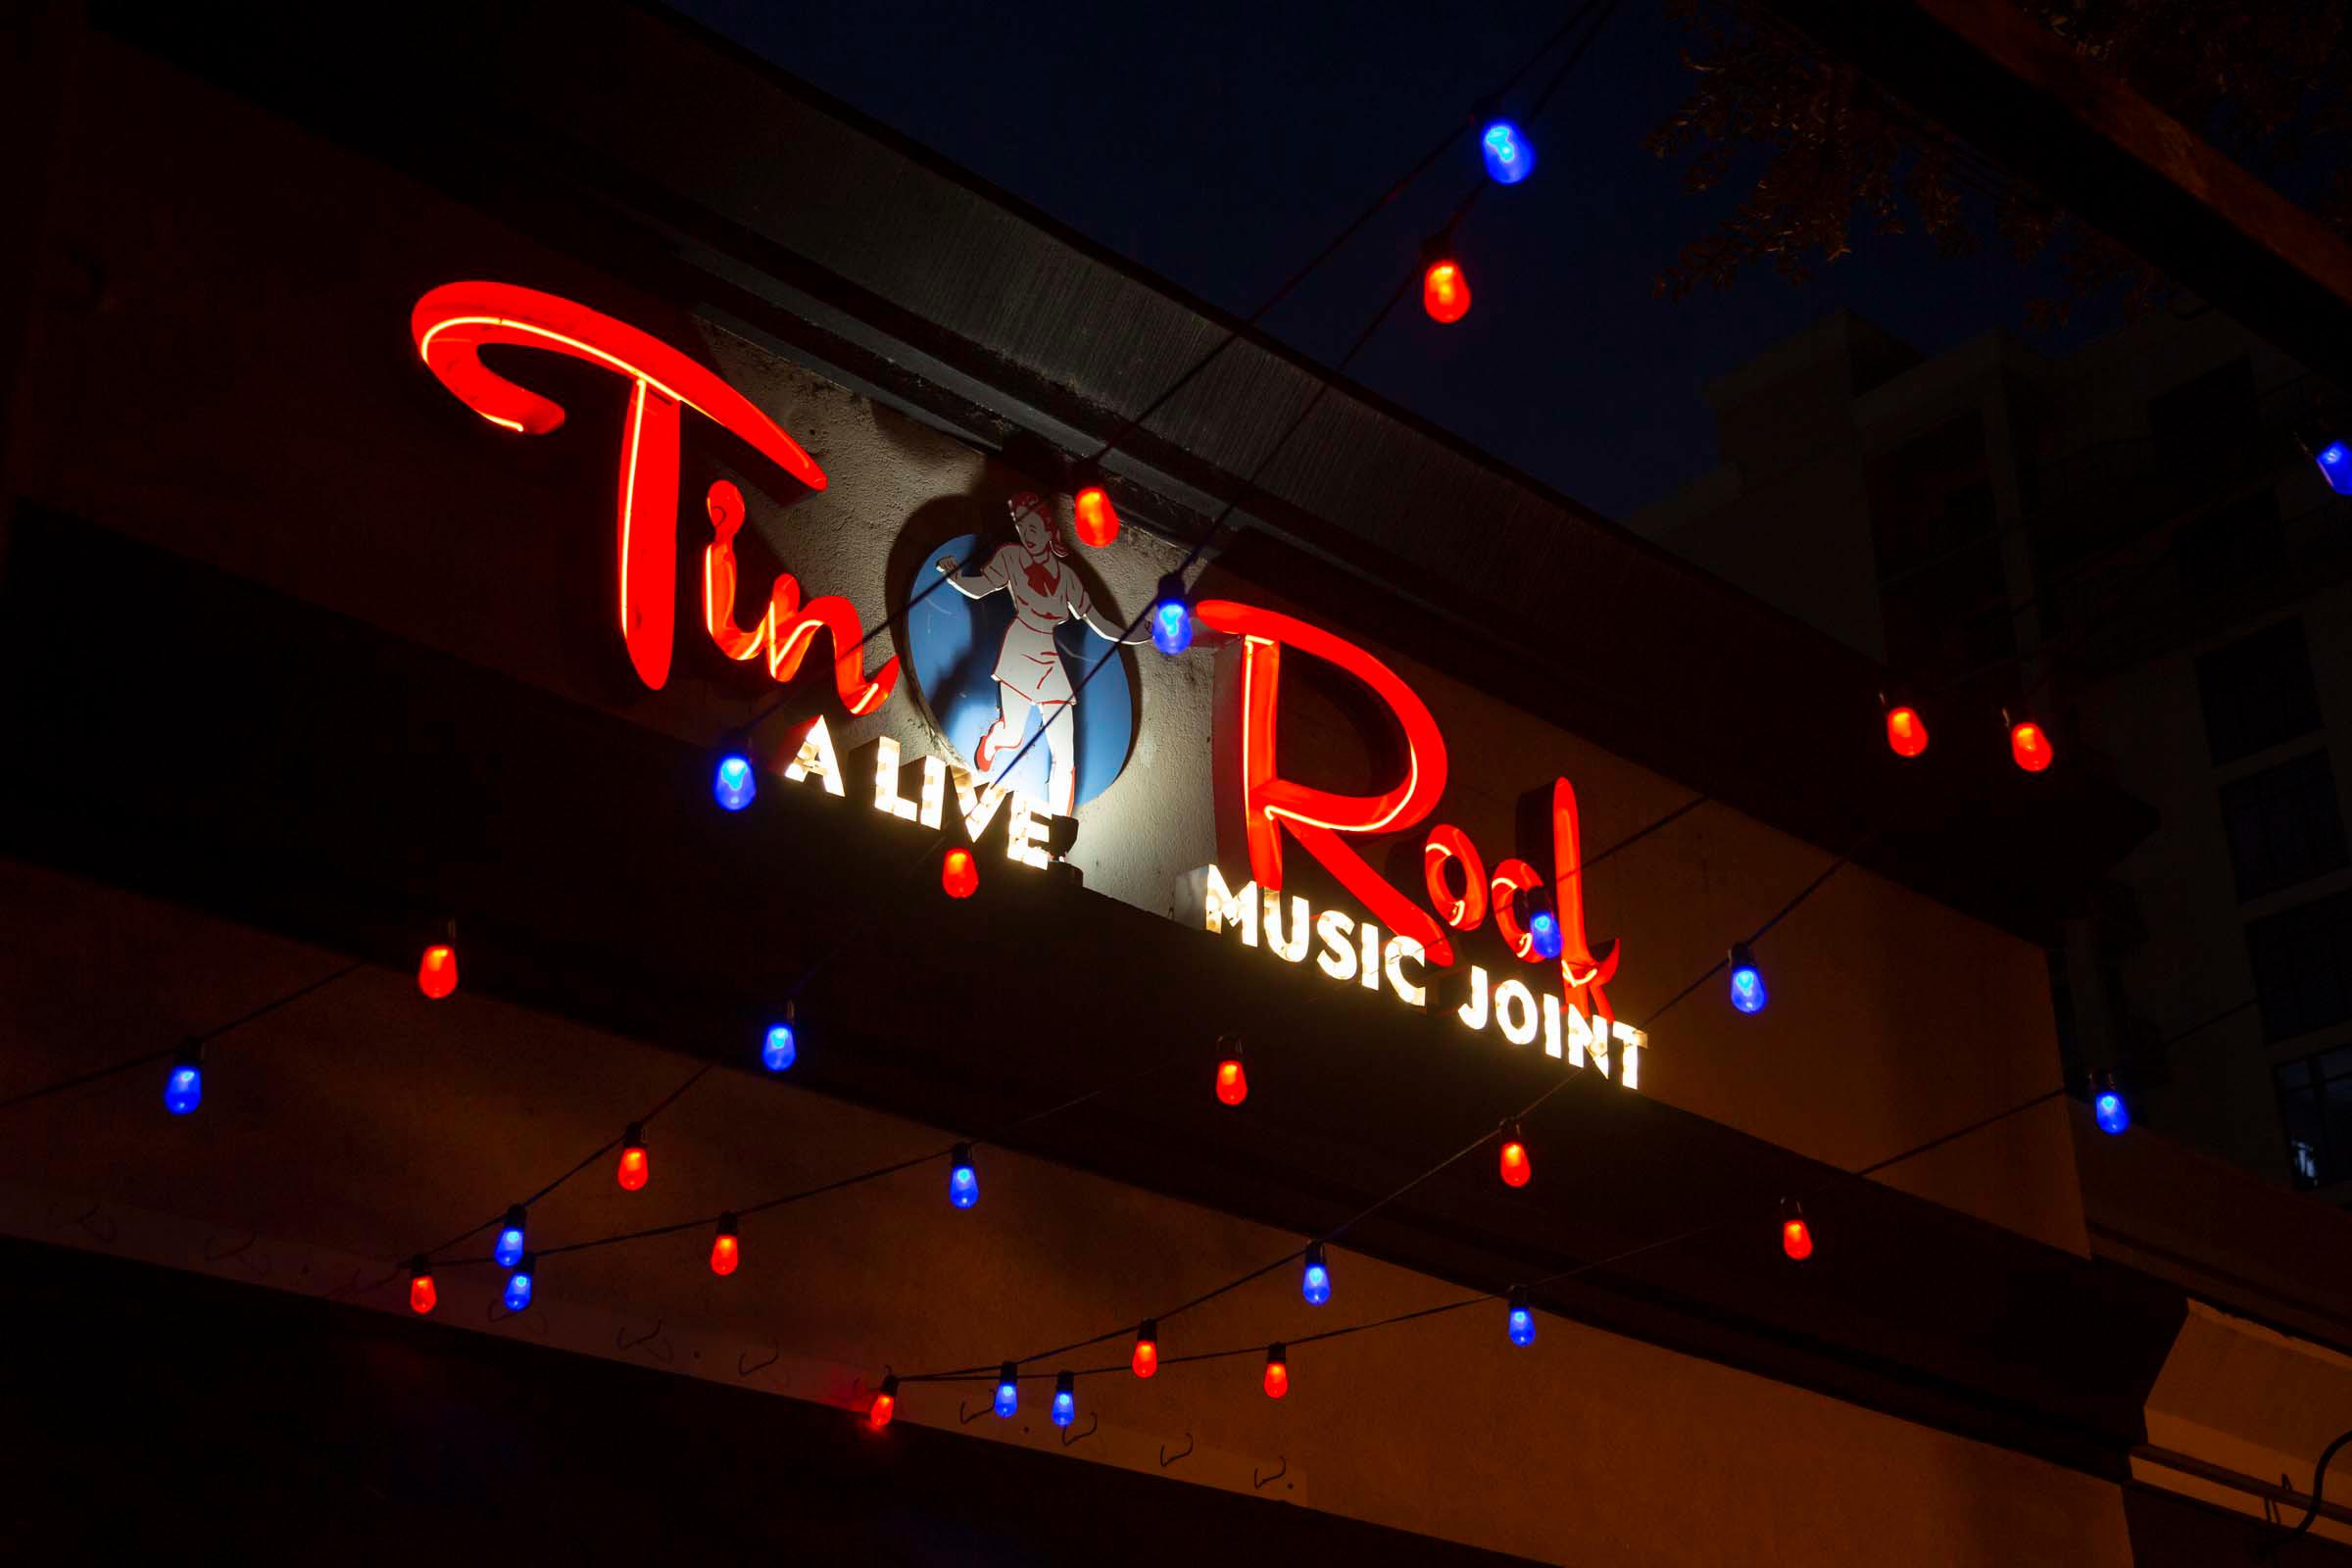 Local live music spot and restaurant Tin Roof